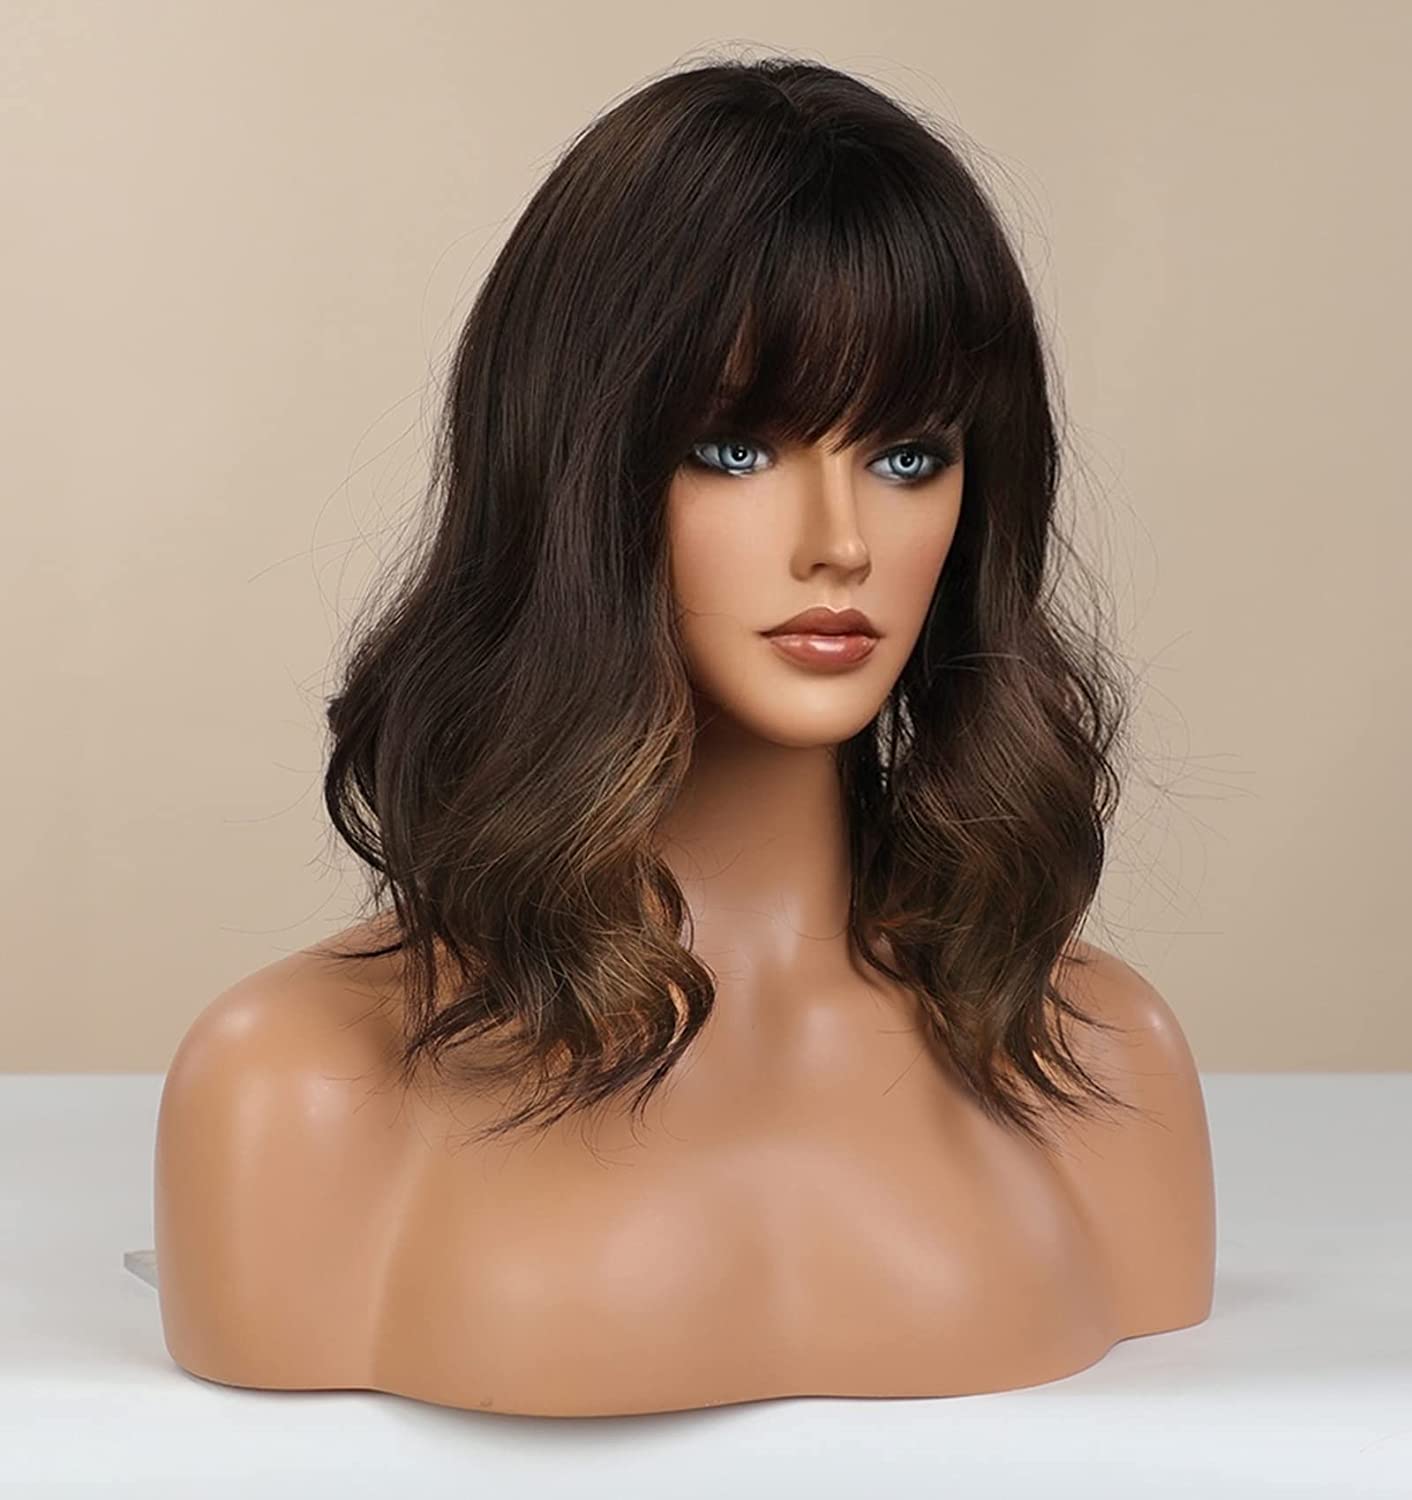 wavy wigs for black women,wigs with highlights,synthetic wigs for women,ombre wigs for women,deep wave frontal wig,wigs for women,highlighted wig,brown wig with highlights,synthetic lace wig,brown wig for women,ombre blonde wig lace synthetic wig,ombre lace wig,brown wigs with highlights,long wavy wig,wavy lace wig,ombre wig,613 wig,blonde wig,lace wighighlight lace wig,highlights wig